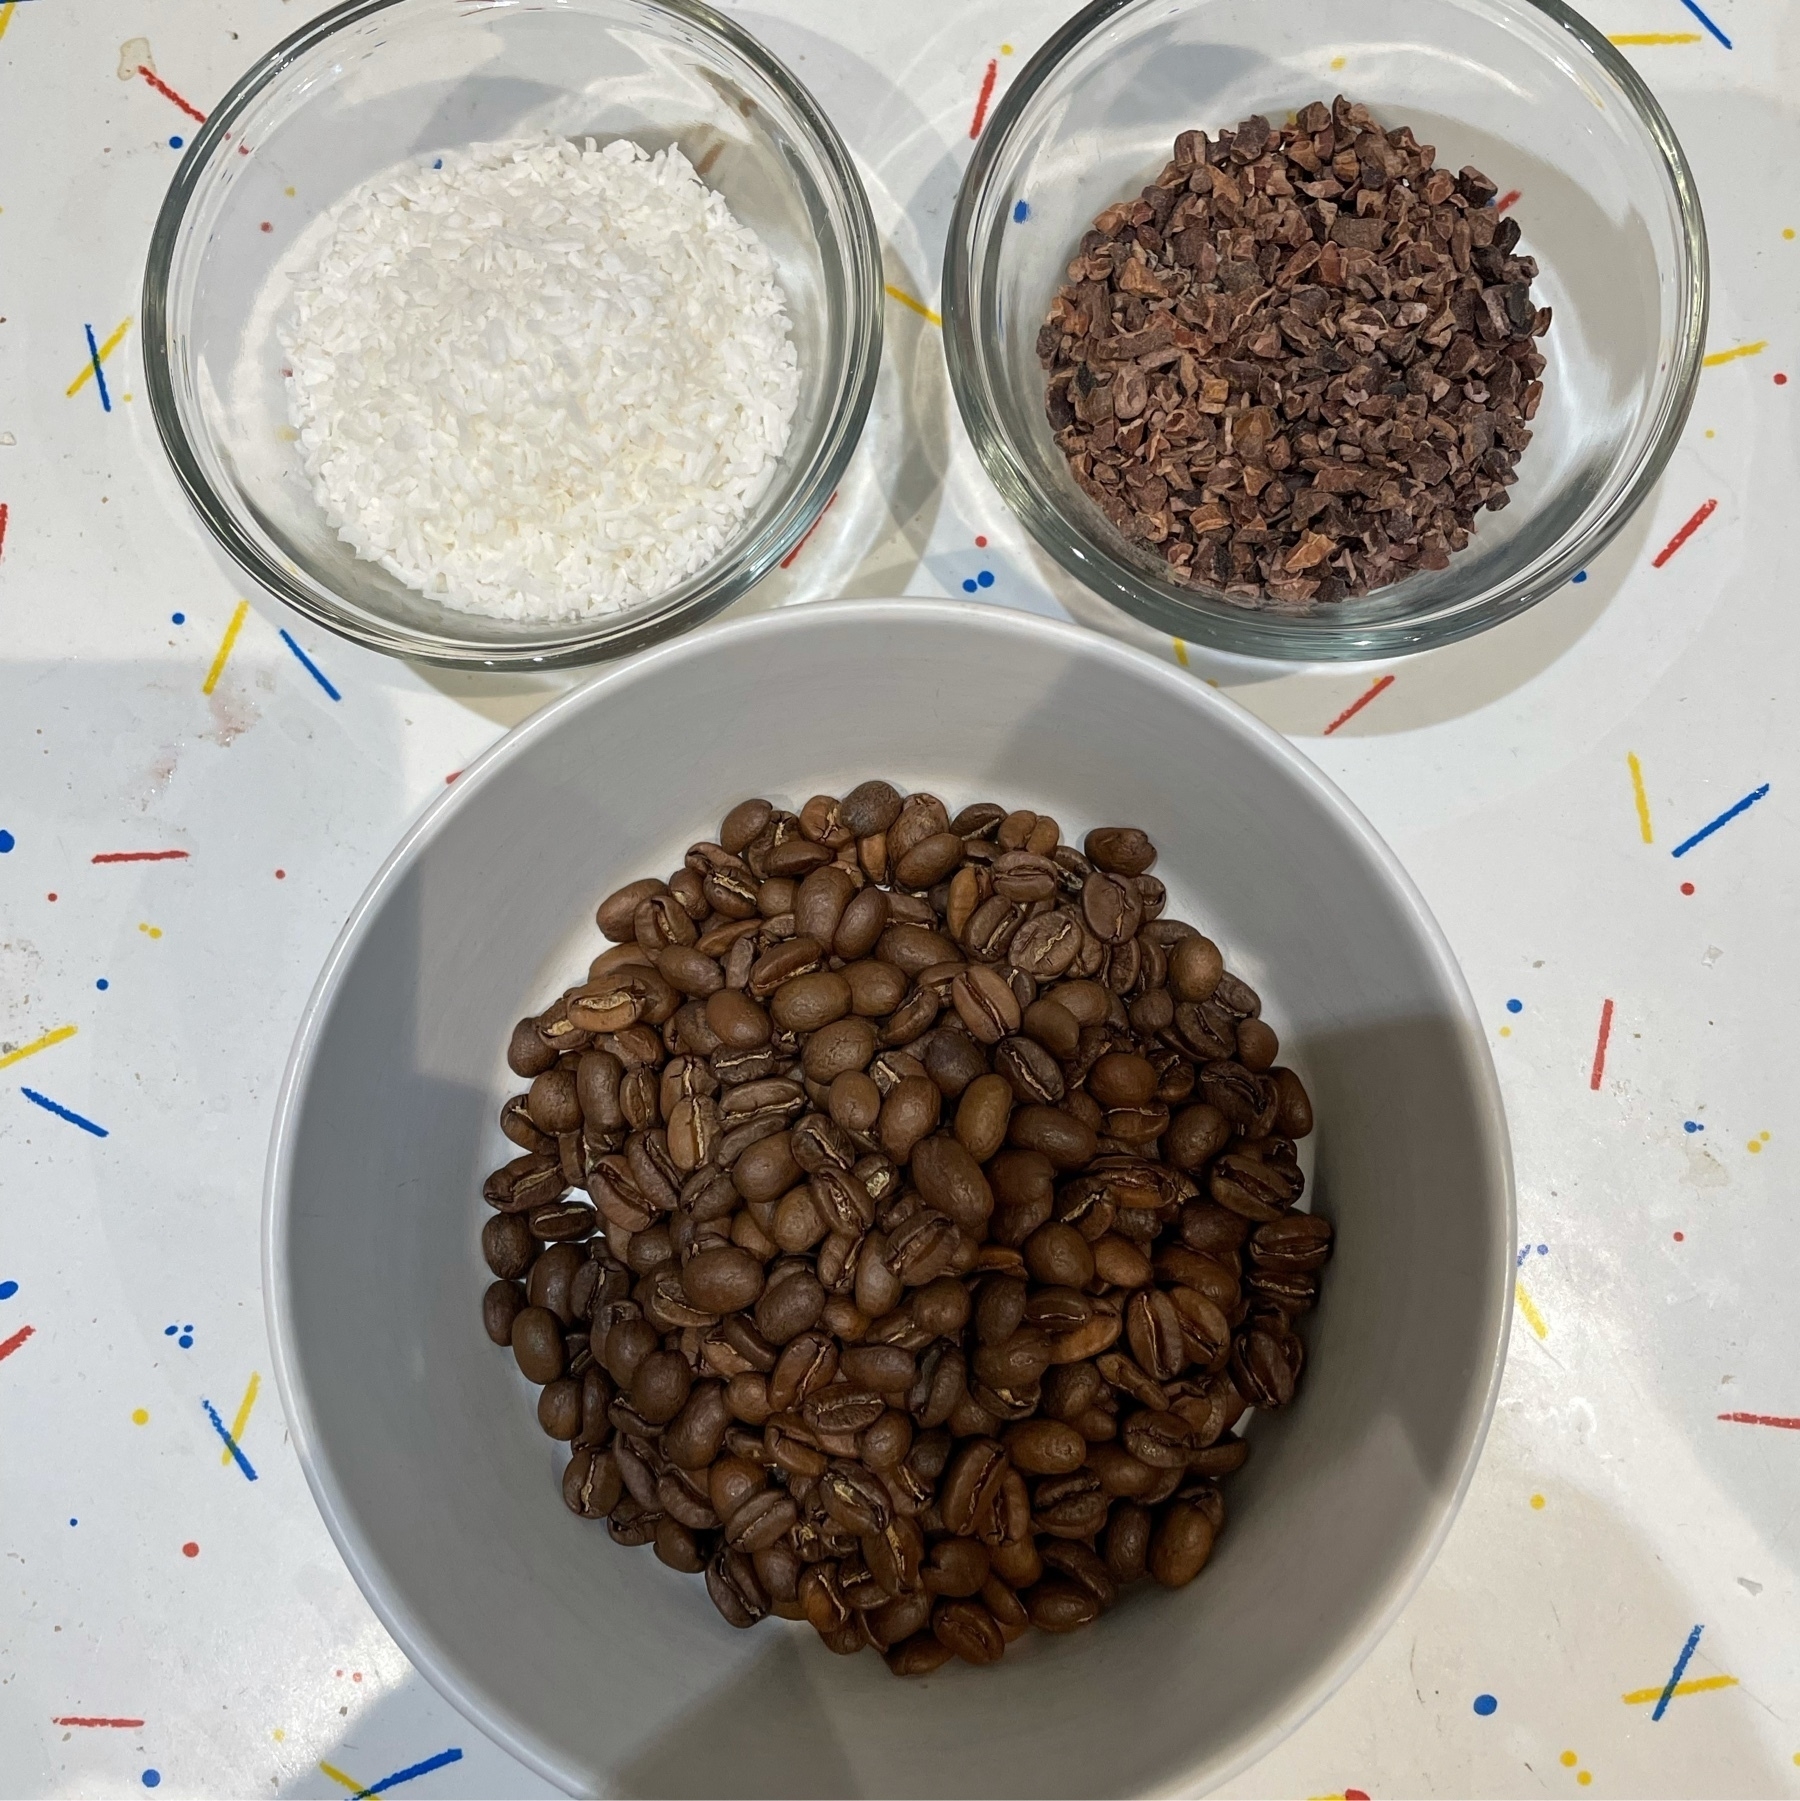 80 grams of coffee beans, 40 grams of cacao nibs and 40 grams of coconut all in seperate bowls. 